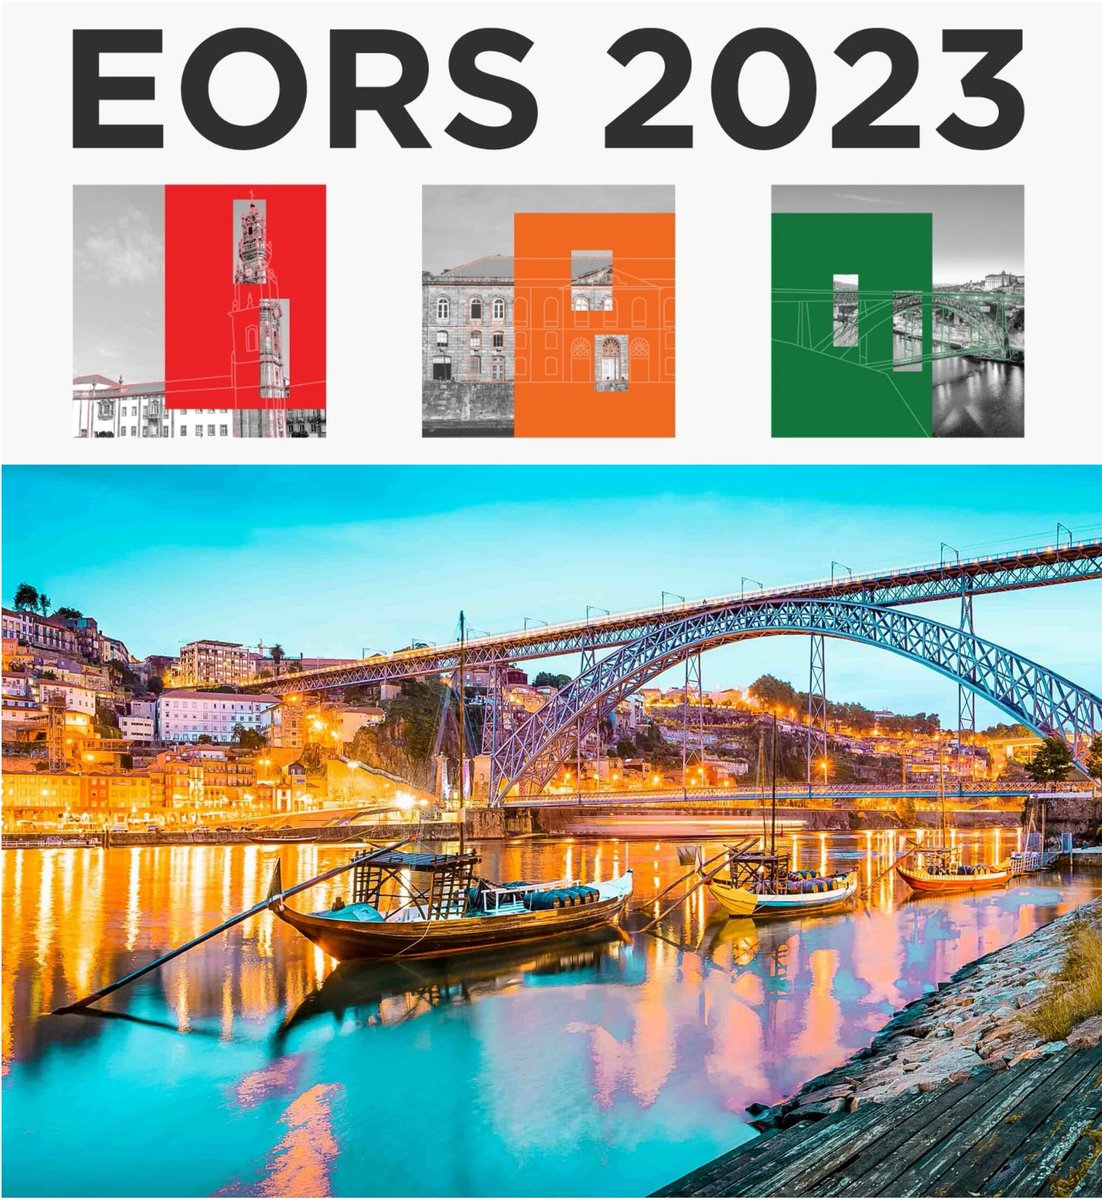 The local organization team is looking forward to welcoming all of you to the beautiful city of Porto! Enjoy the Scientific Program 🤓 and enjoy the sightseeing of Porto & Douro! 🤩 #eors2023